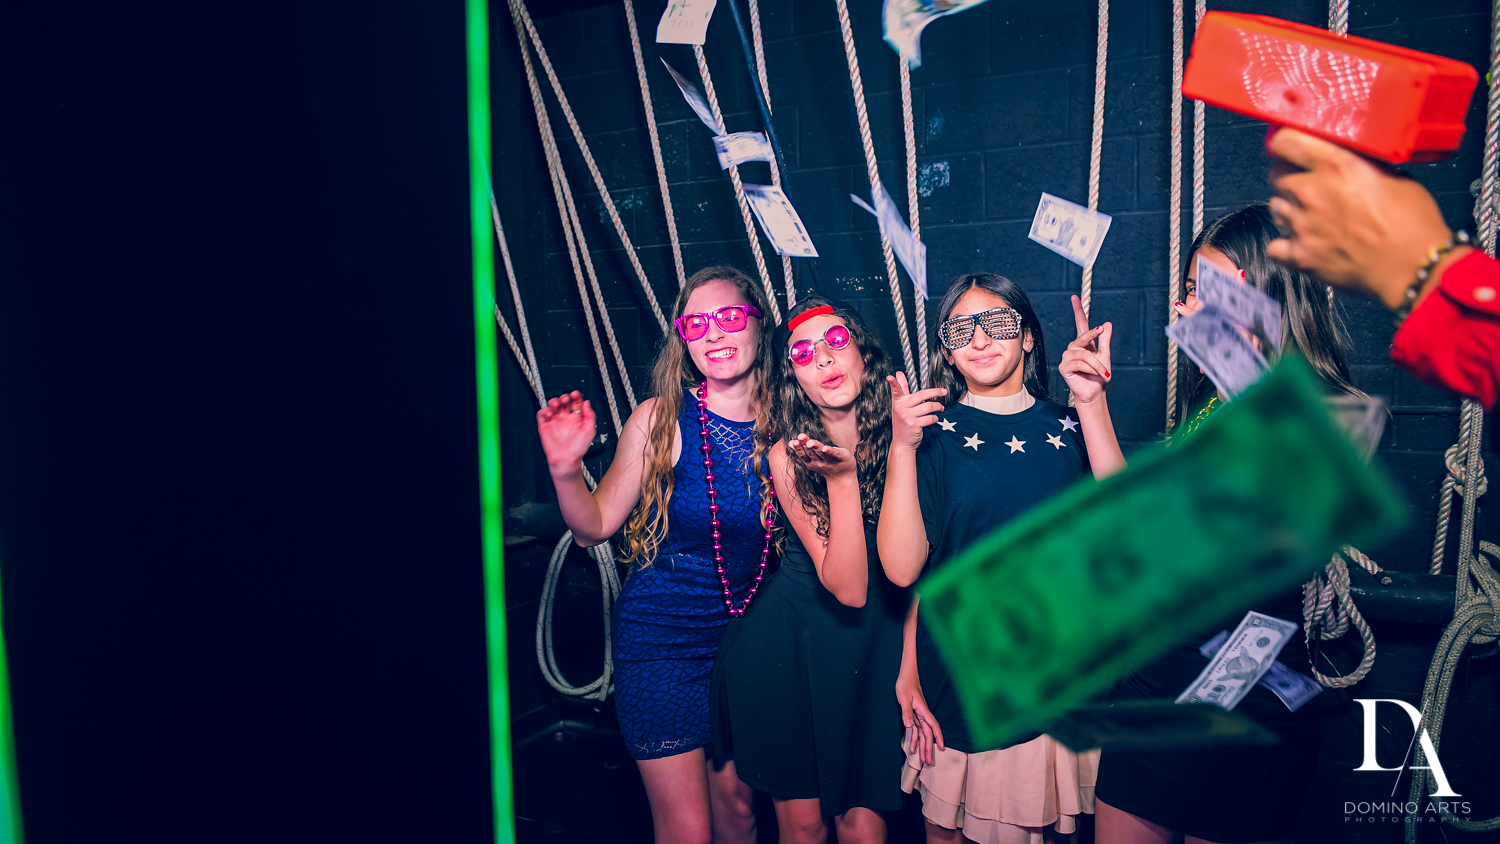 photo booth at The Greatest Showman theme Bat Mitzvah at the filmore miami by Domino Arts Photography